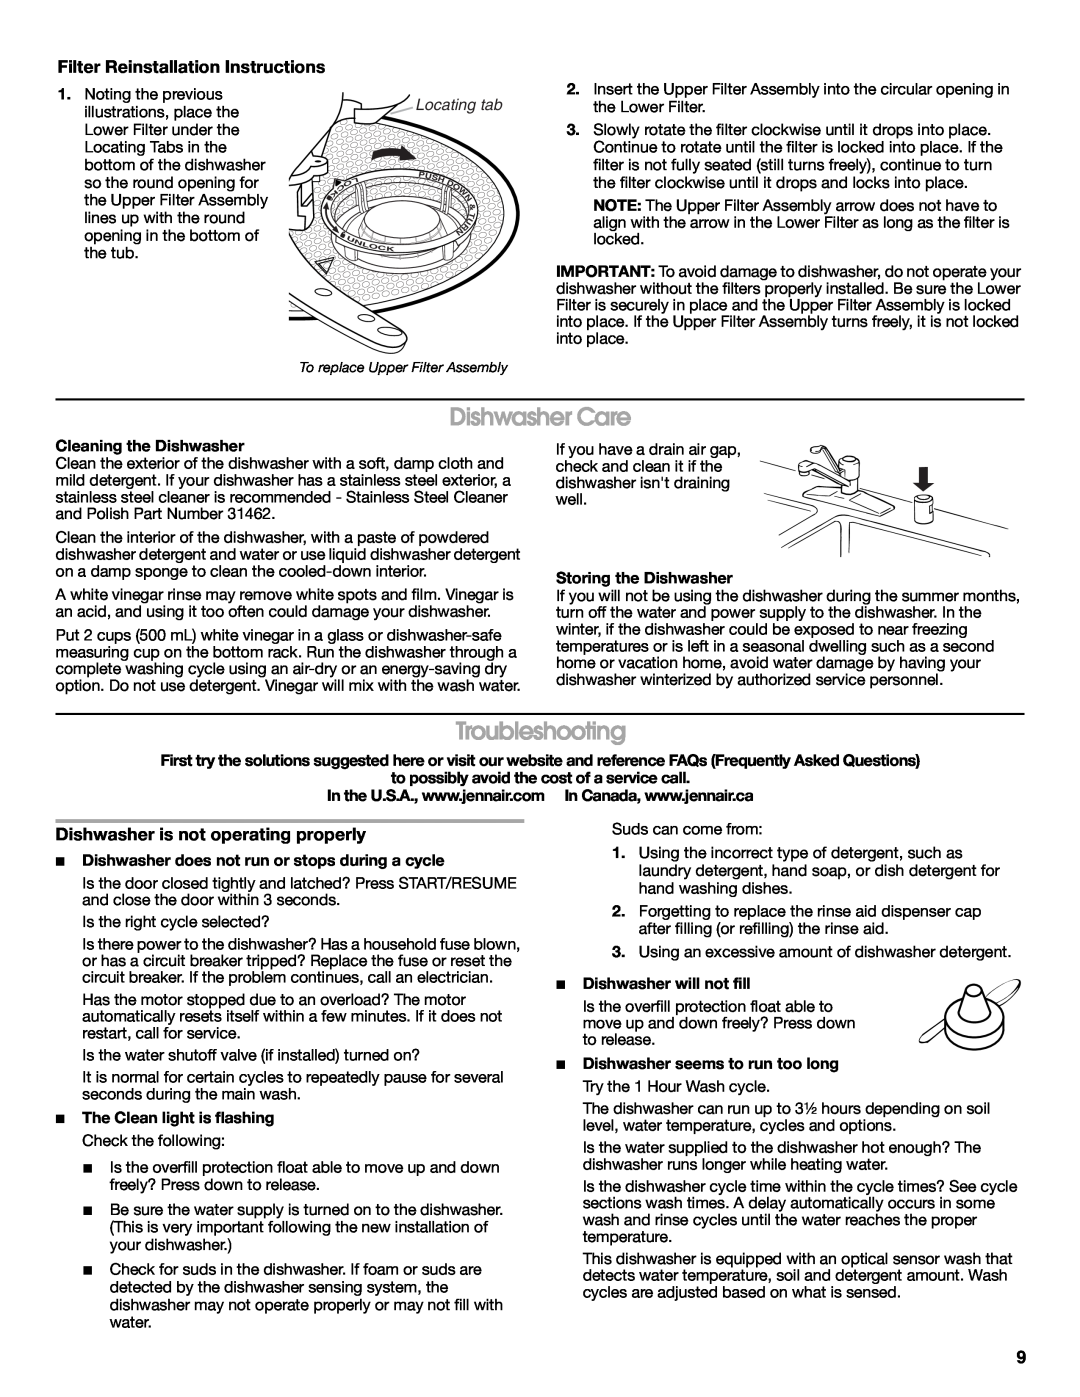 Jenn-Air W10300216A warranty Dishwasher Care, Troubleshooting, Filter Reinstallation Instructions, Locating tab 